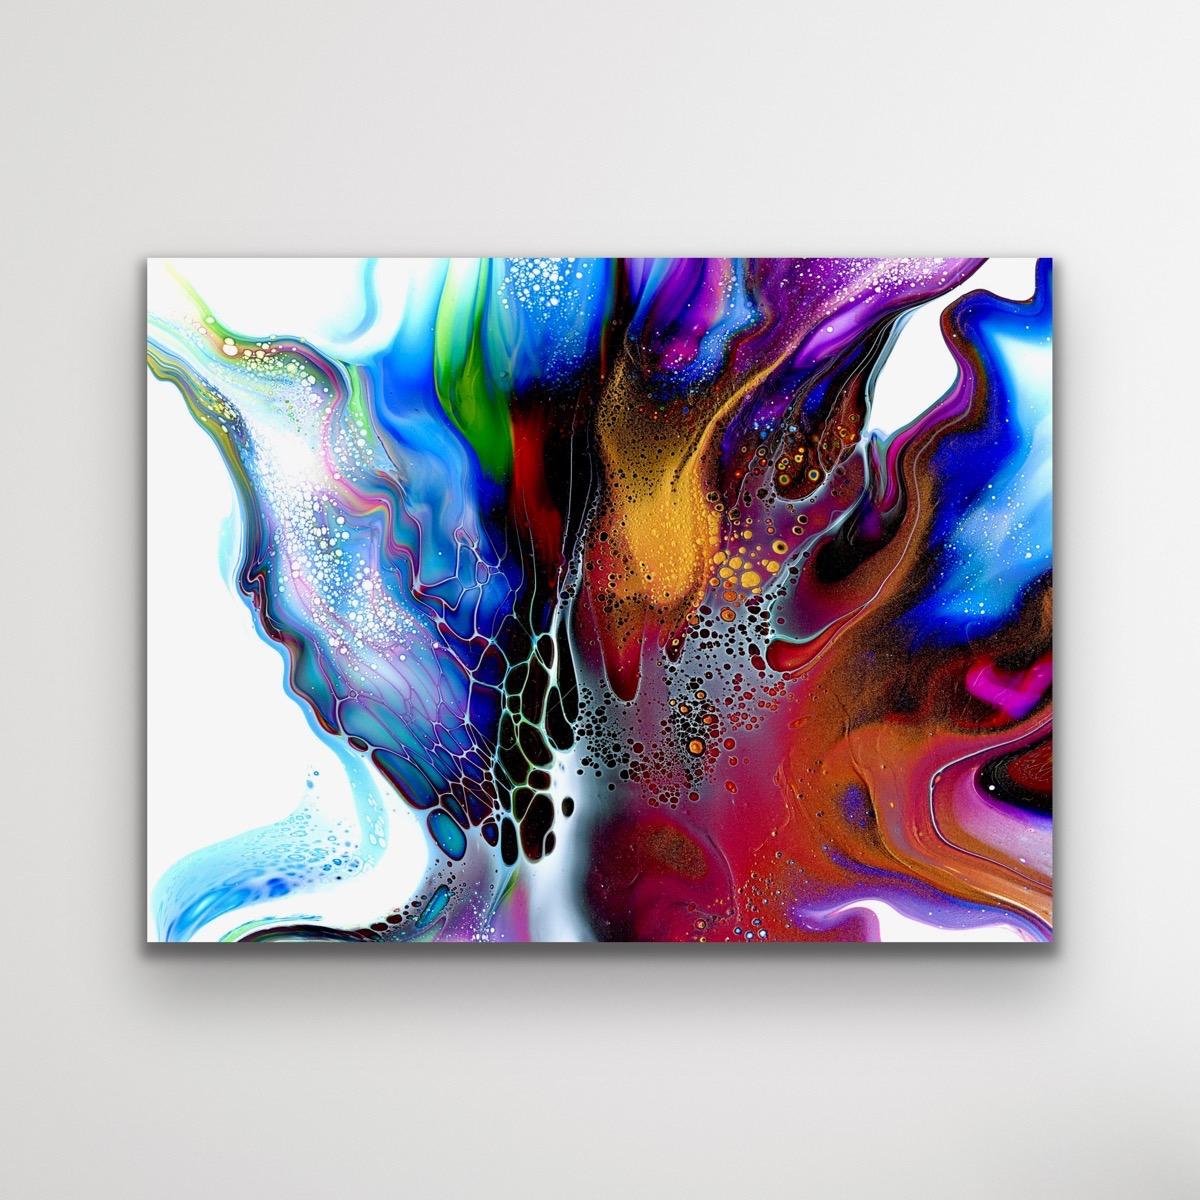 This contemporary colorful abstract painting is printed on a lightweight metal composite and comes signed by the hand-artist and ready to hang. 

-Title: Conjure
-Artist: Celeste Reiter
LIMITED EDITION; 2 of 50
*This piece is a limited edition